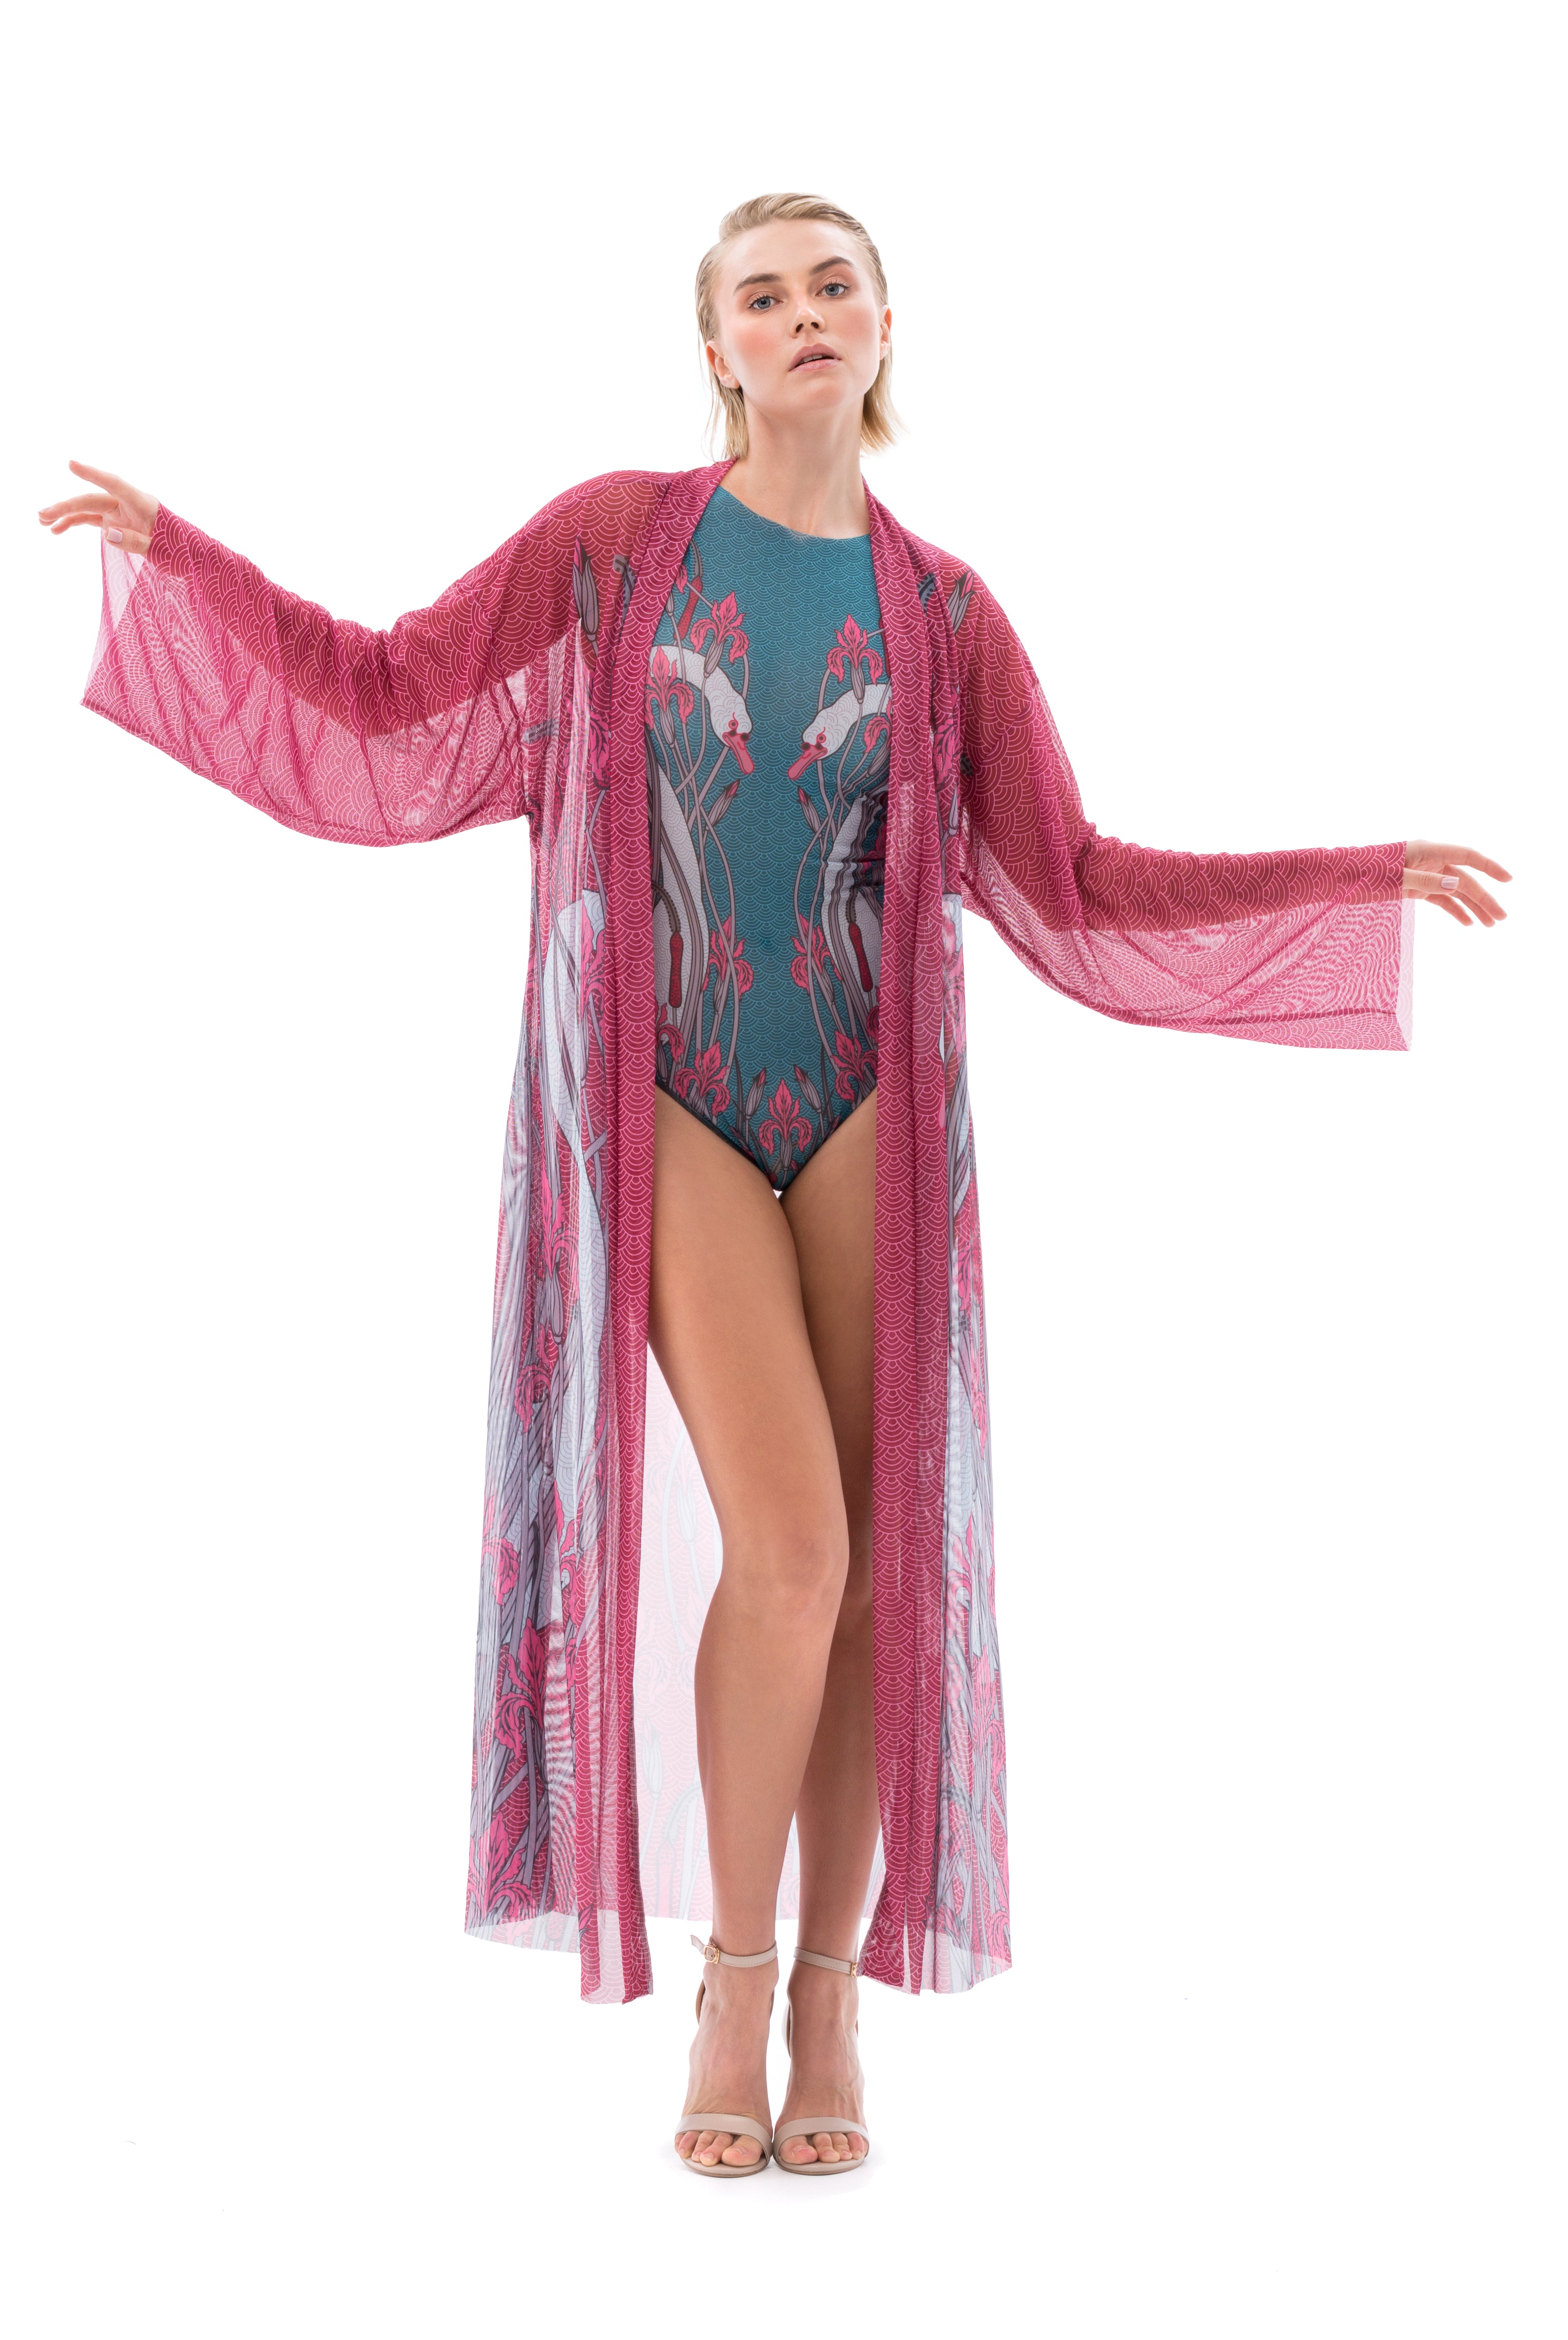  Explore sustainable tan-through smart swimsuits with a chic swans print. This file showcases beach robes with SPF15 protection, offering classic luxury and iconic style for your beach outings.